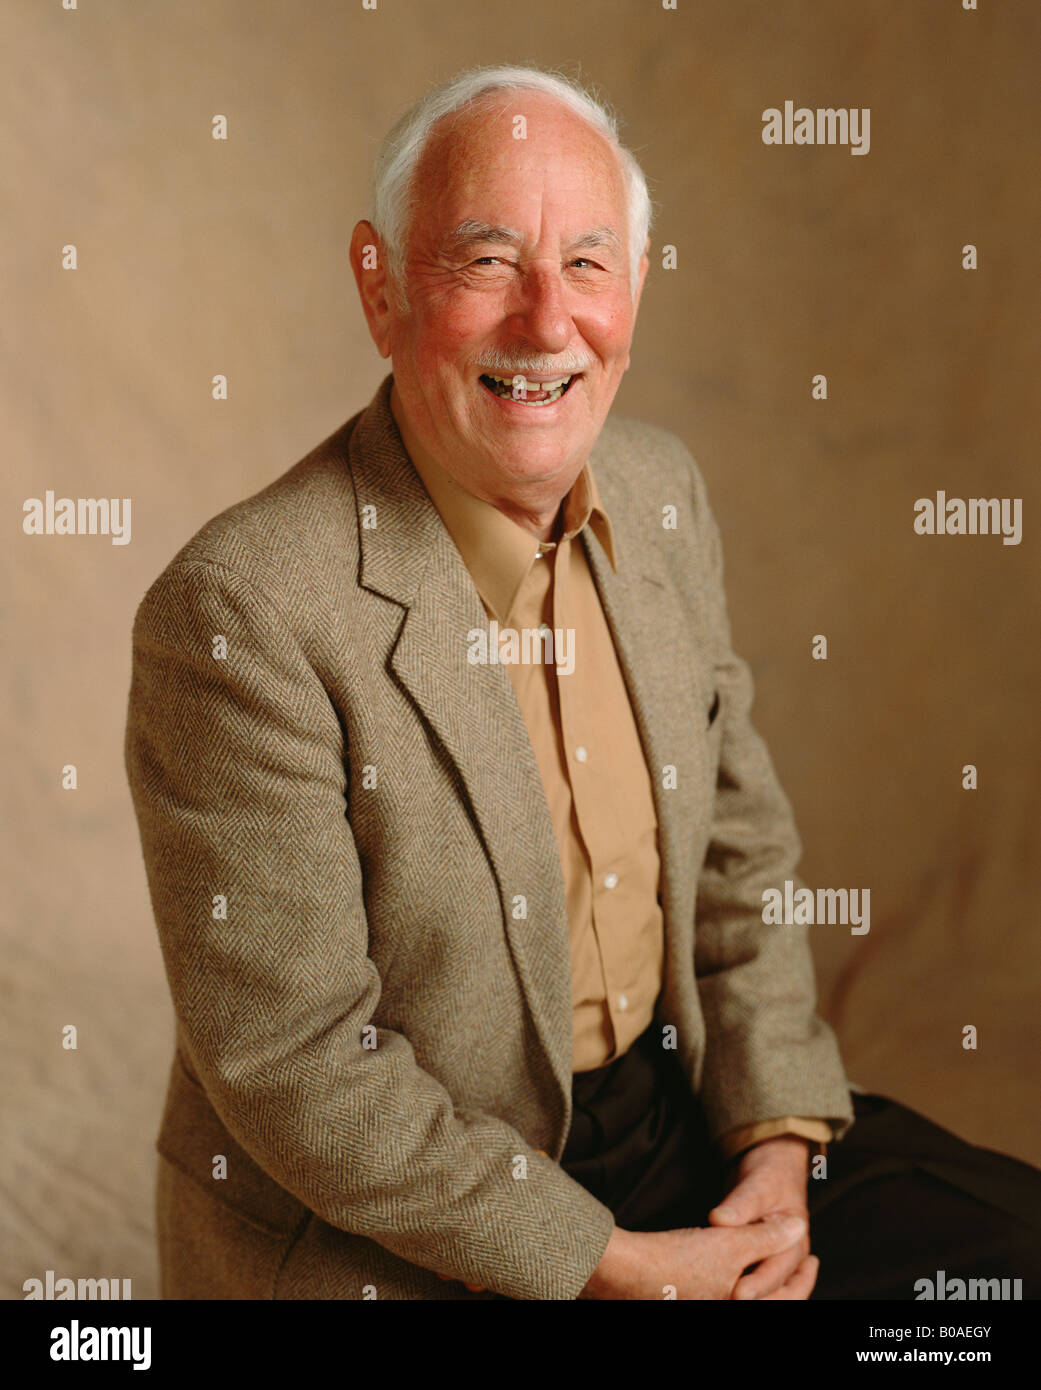 An senior male sits for his portrait with a big smile. Stock Photo